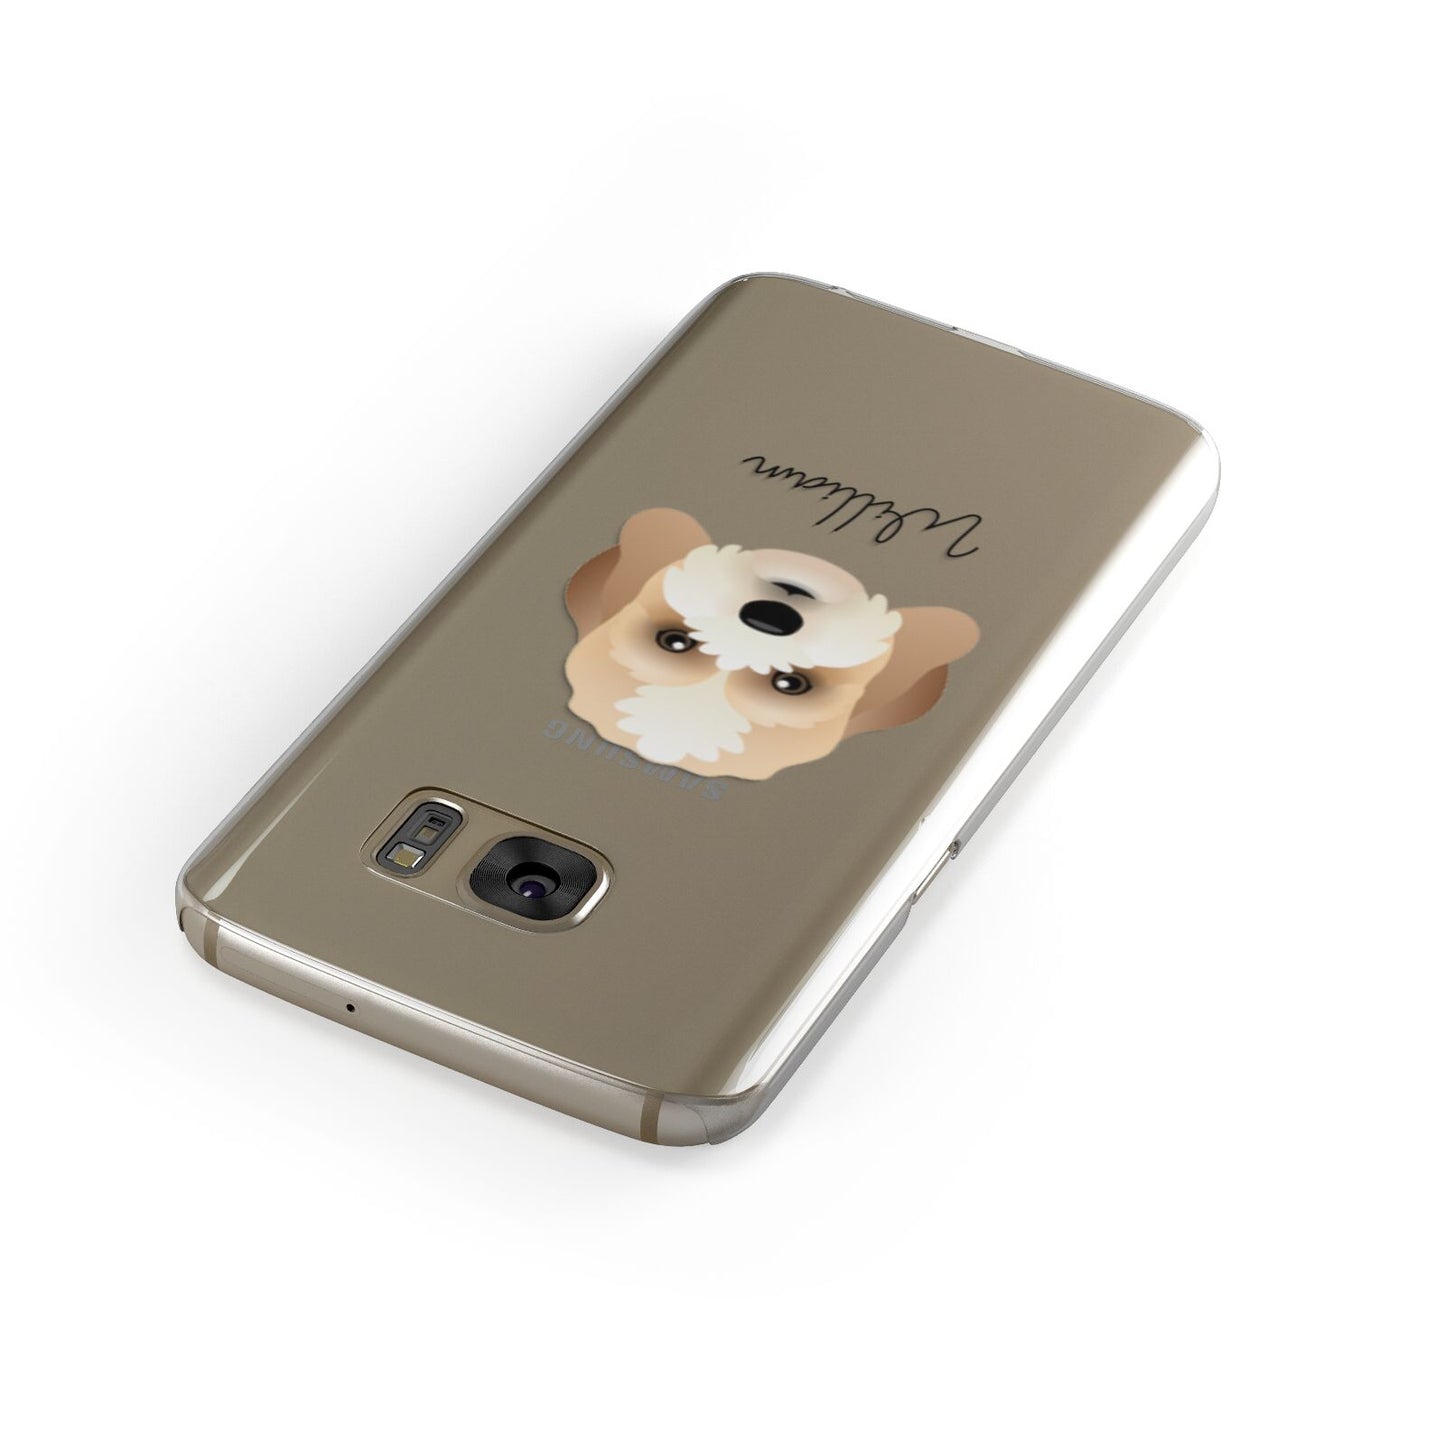 Lhasapoo Personalised Samsung Galaxy Case Front Close Up